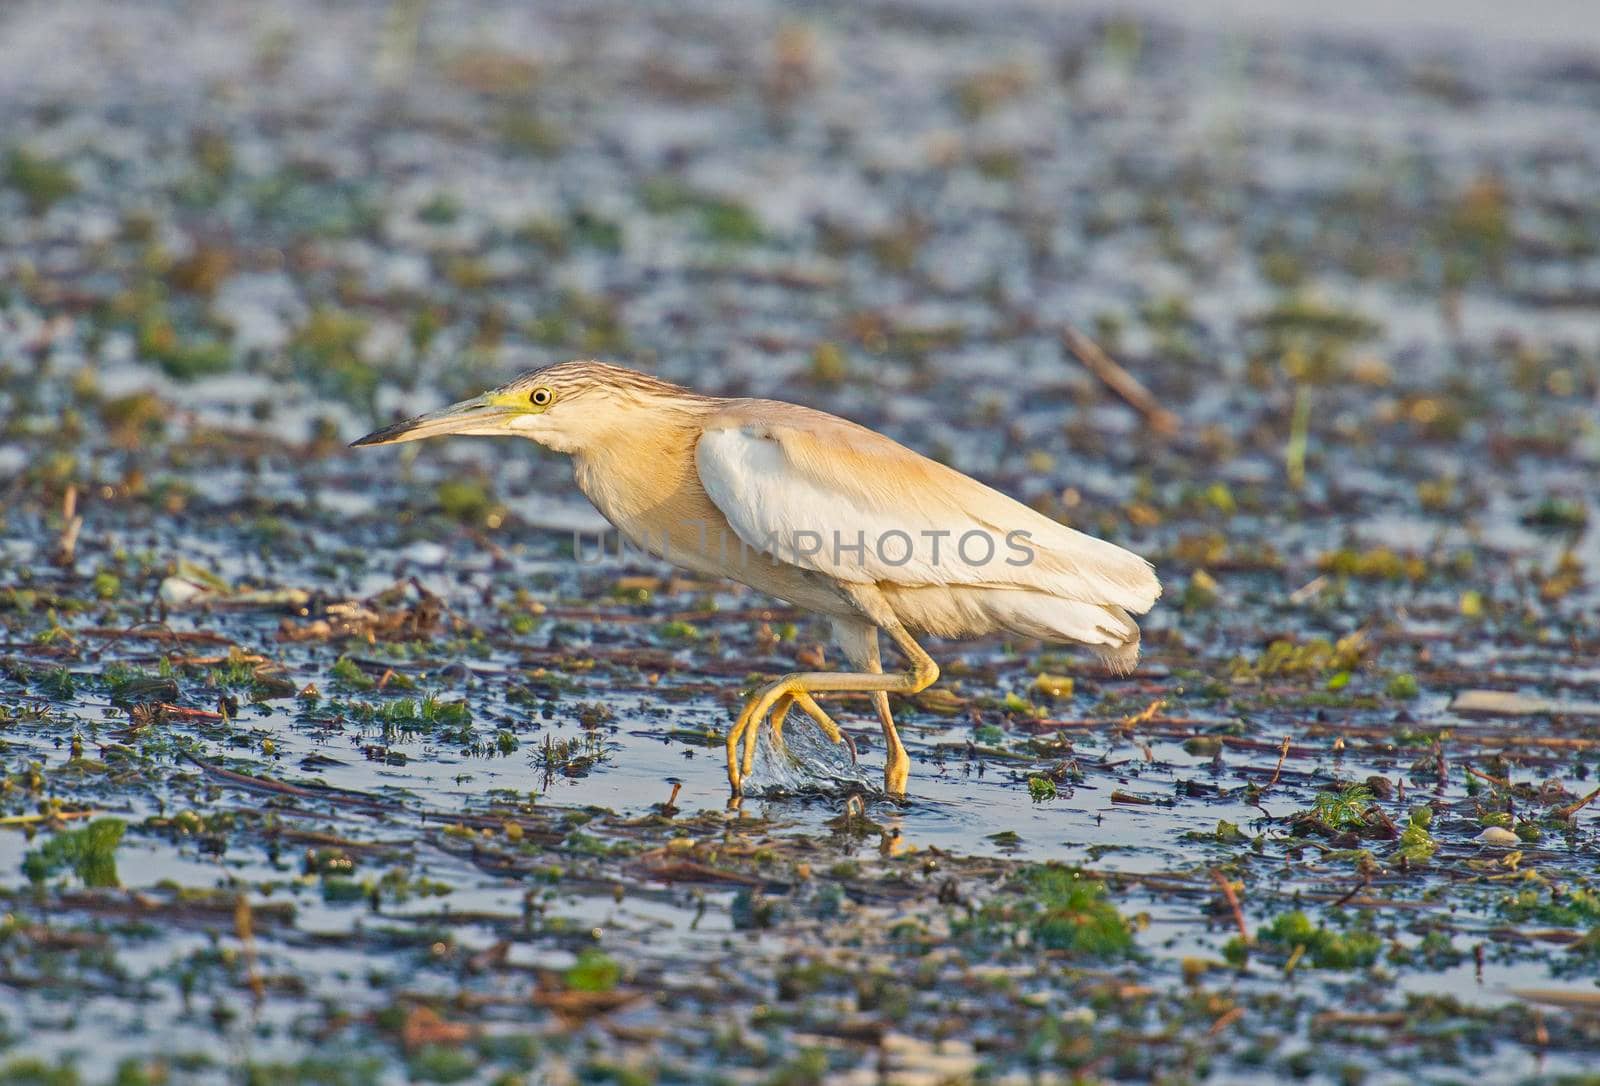 Squacco heron stood in grass reeds by river bank by paulvinten